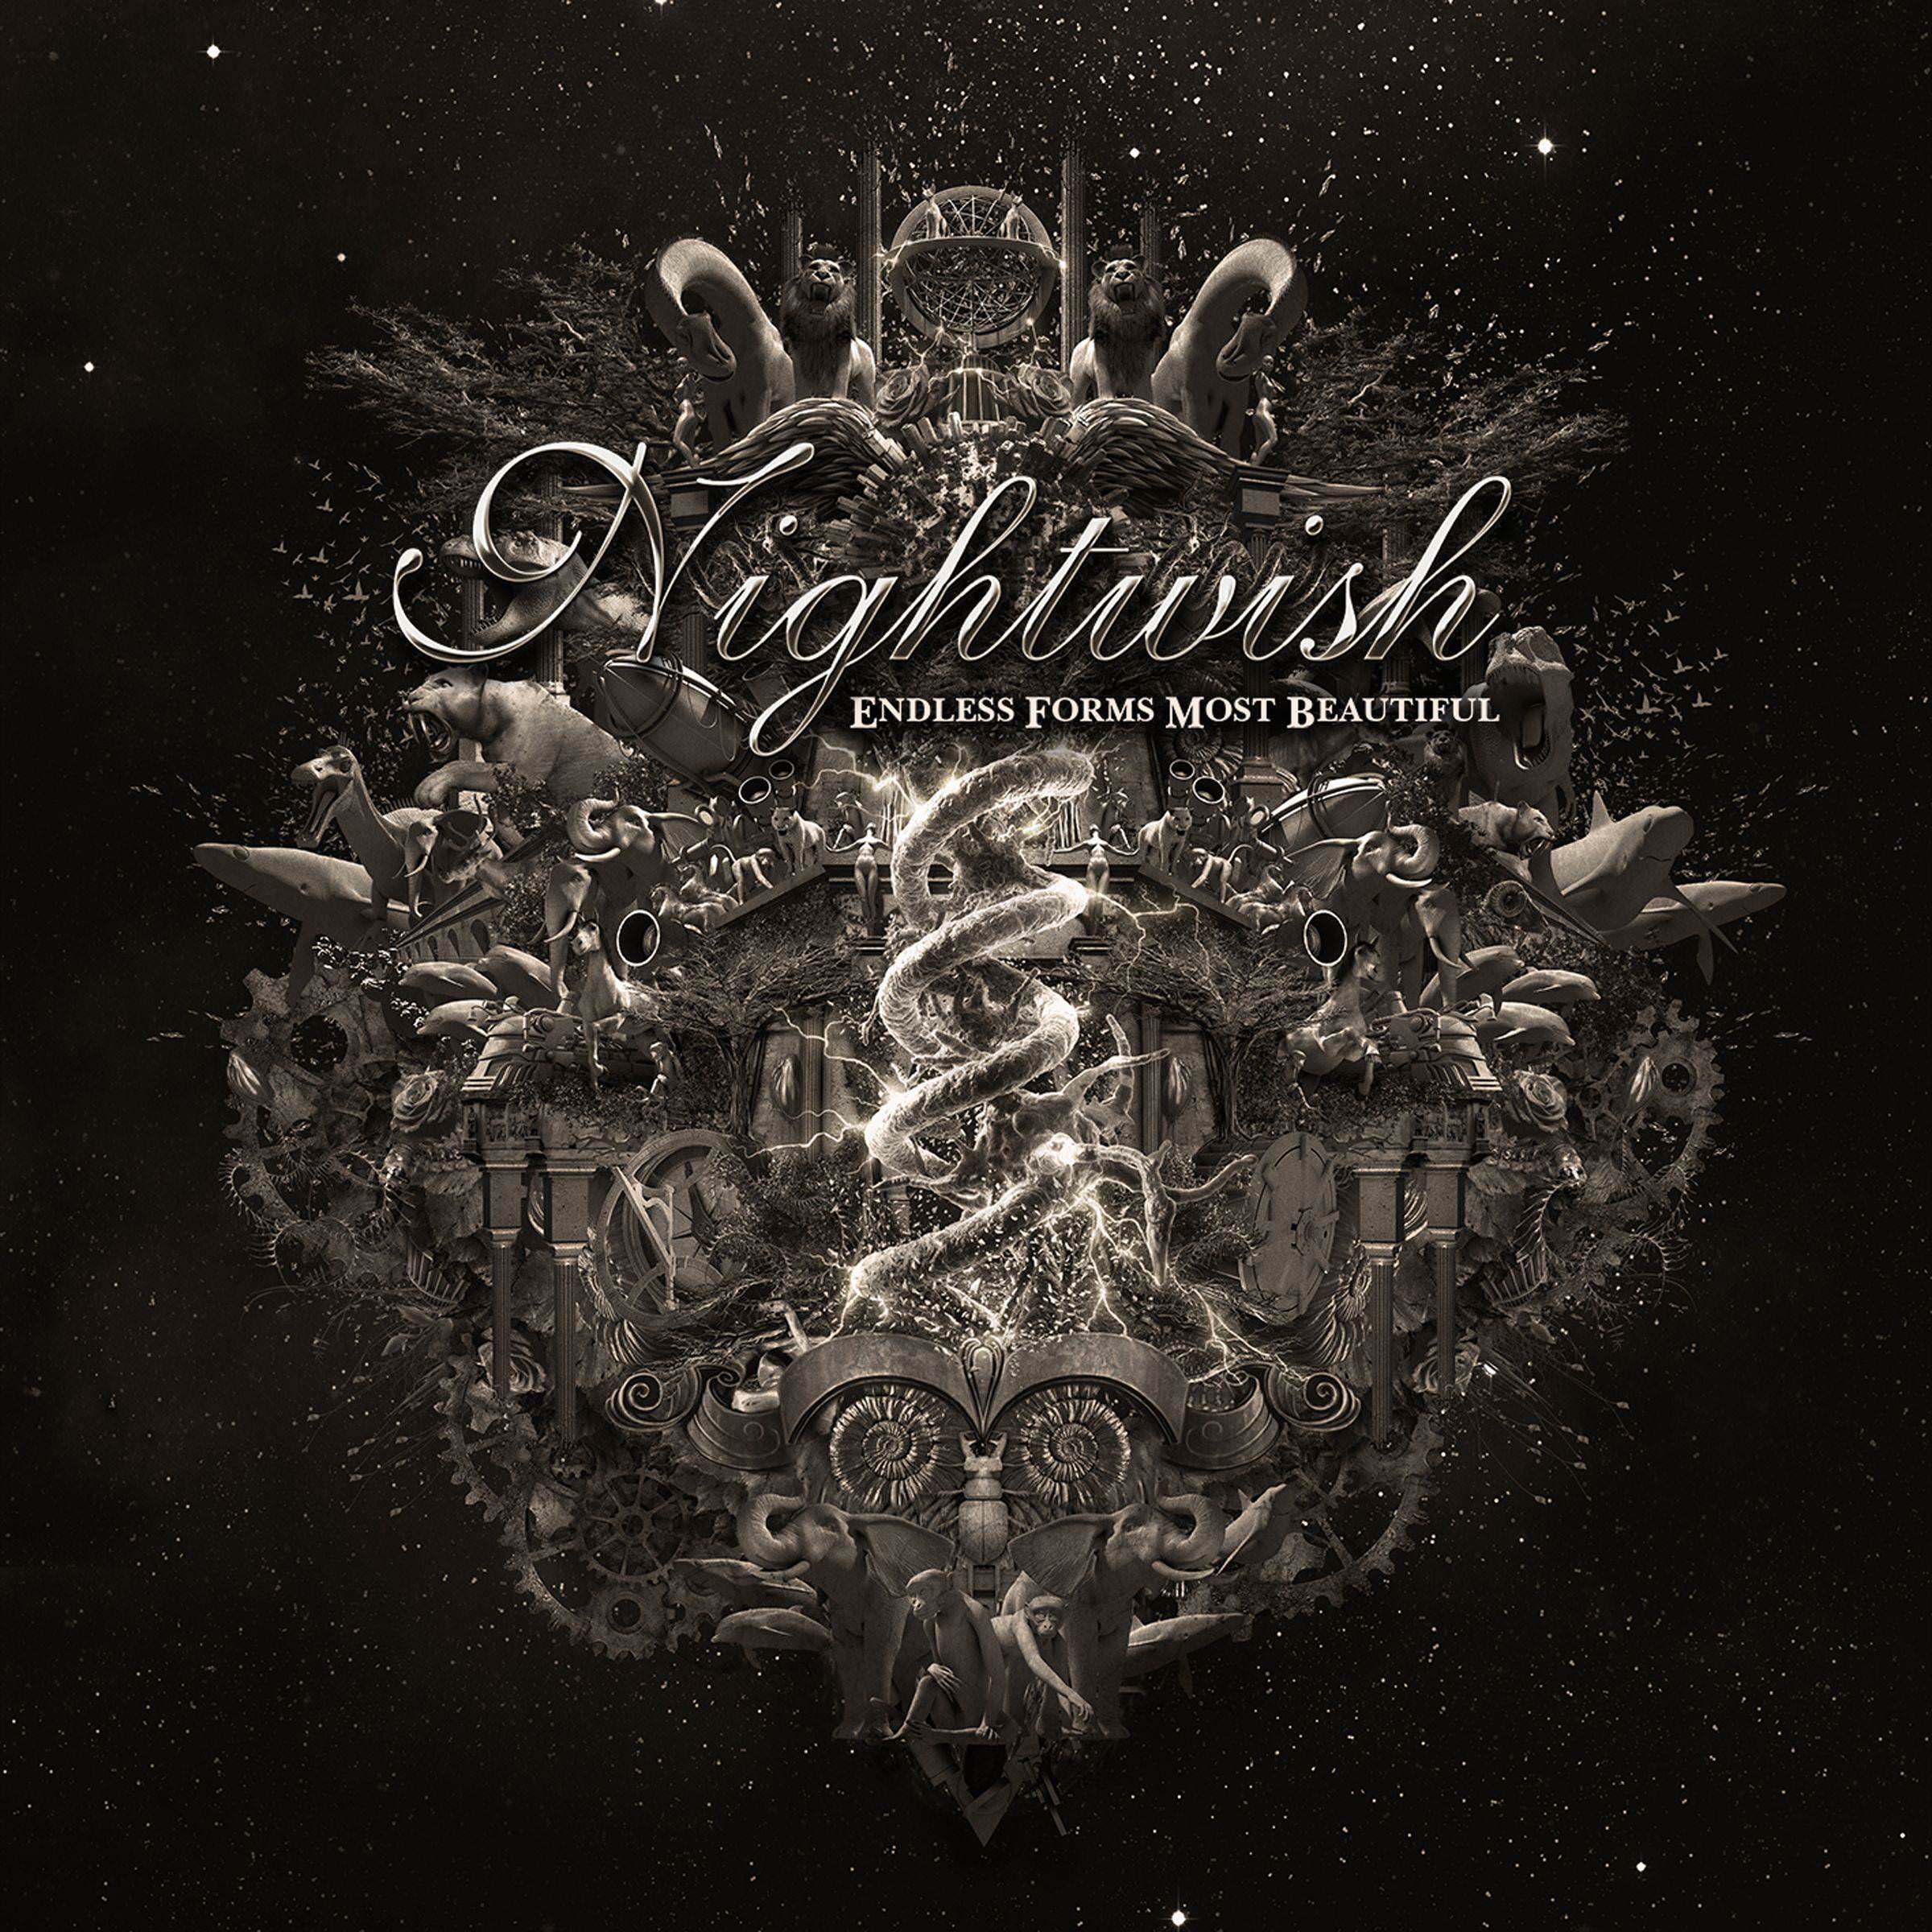 Nightwish - Endless Forms Most Beautiful {Deluxe} (2015/2018) [AcousticSounds FLAC 24bit/44,1kHz]